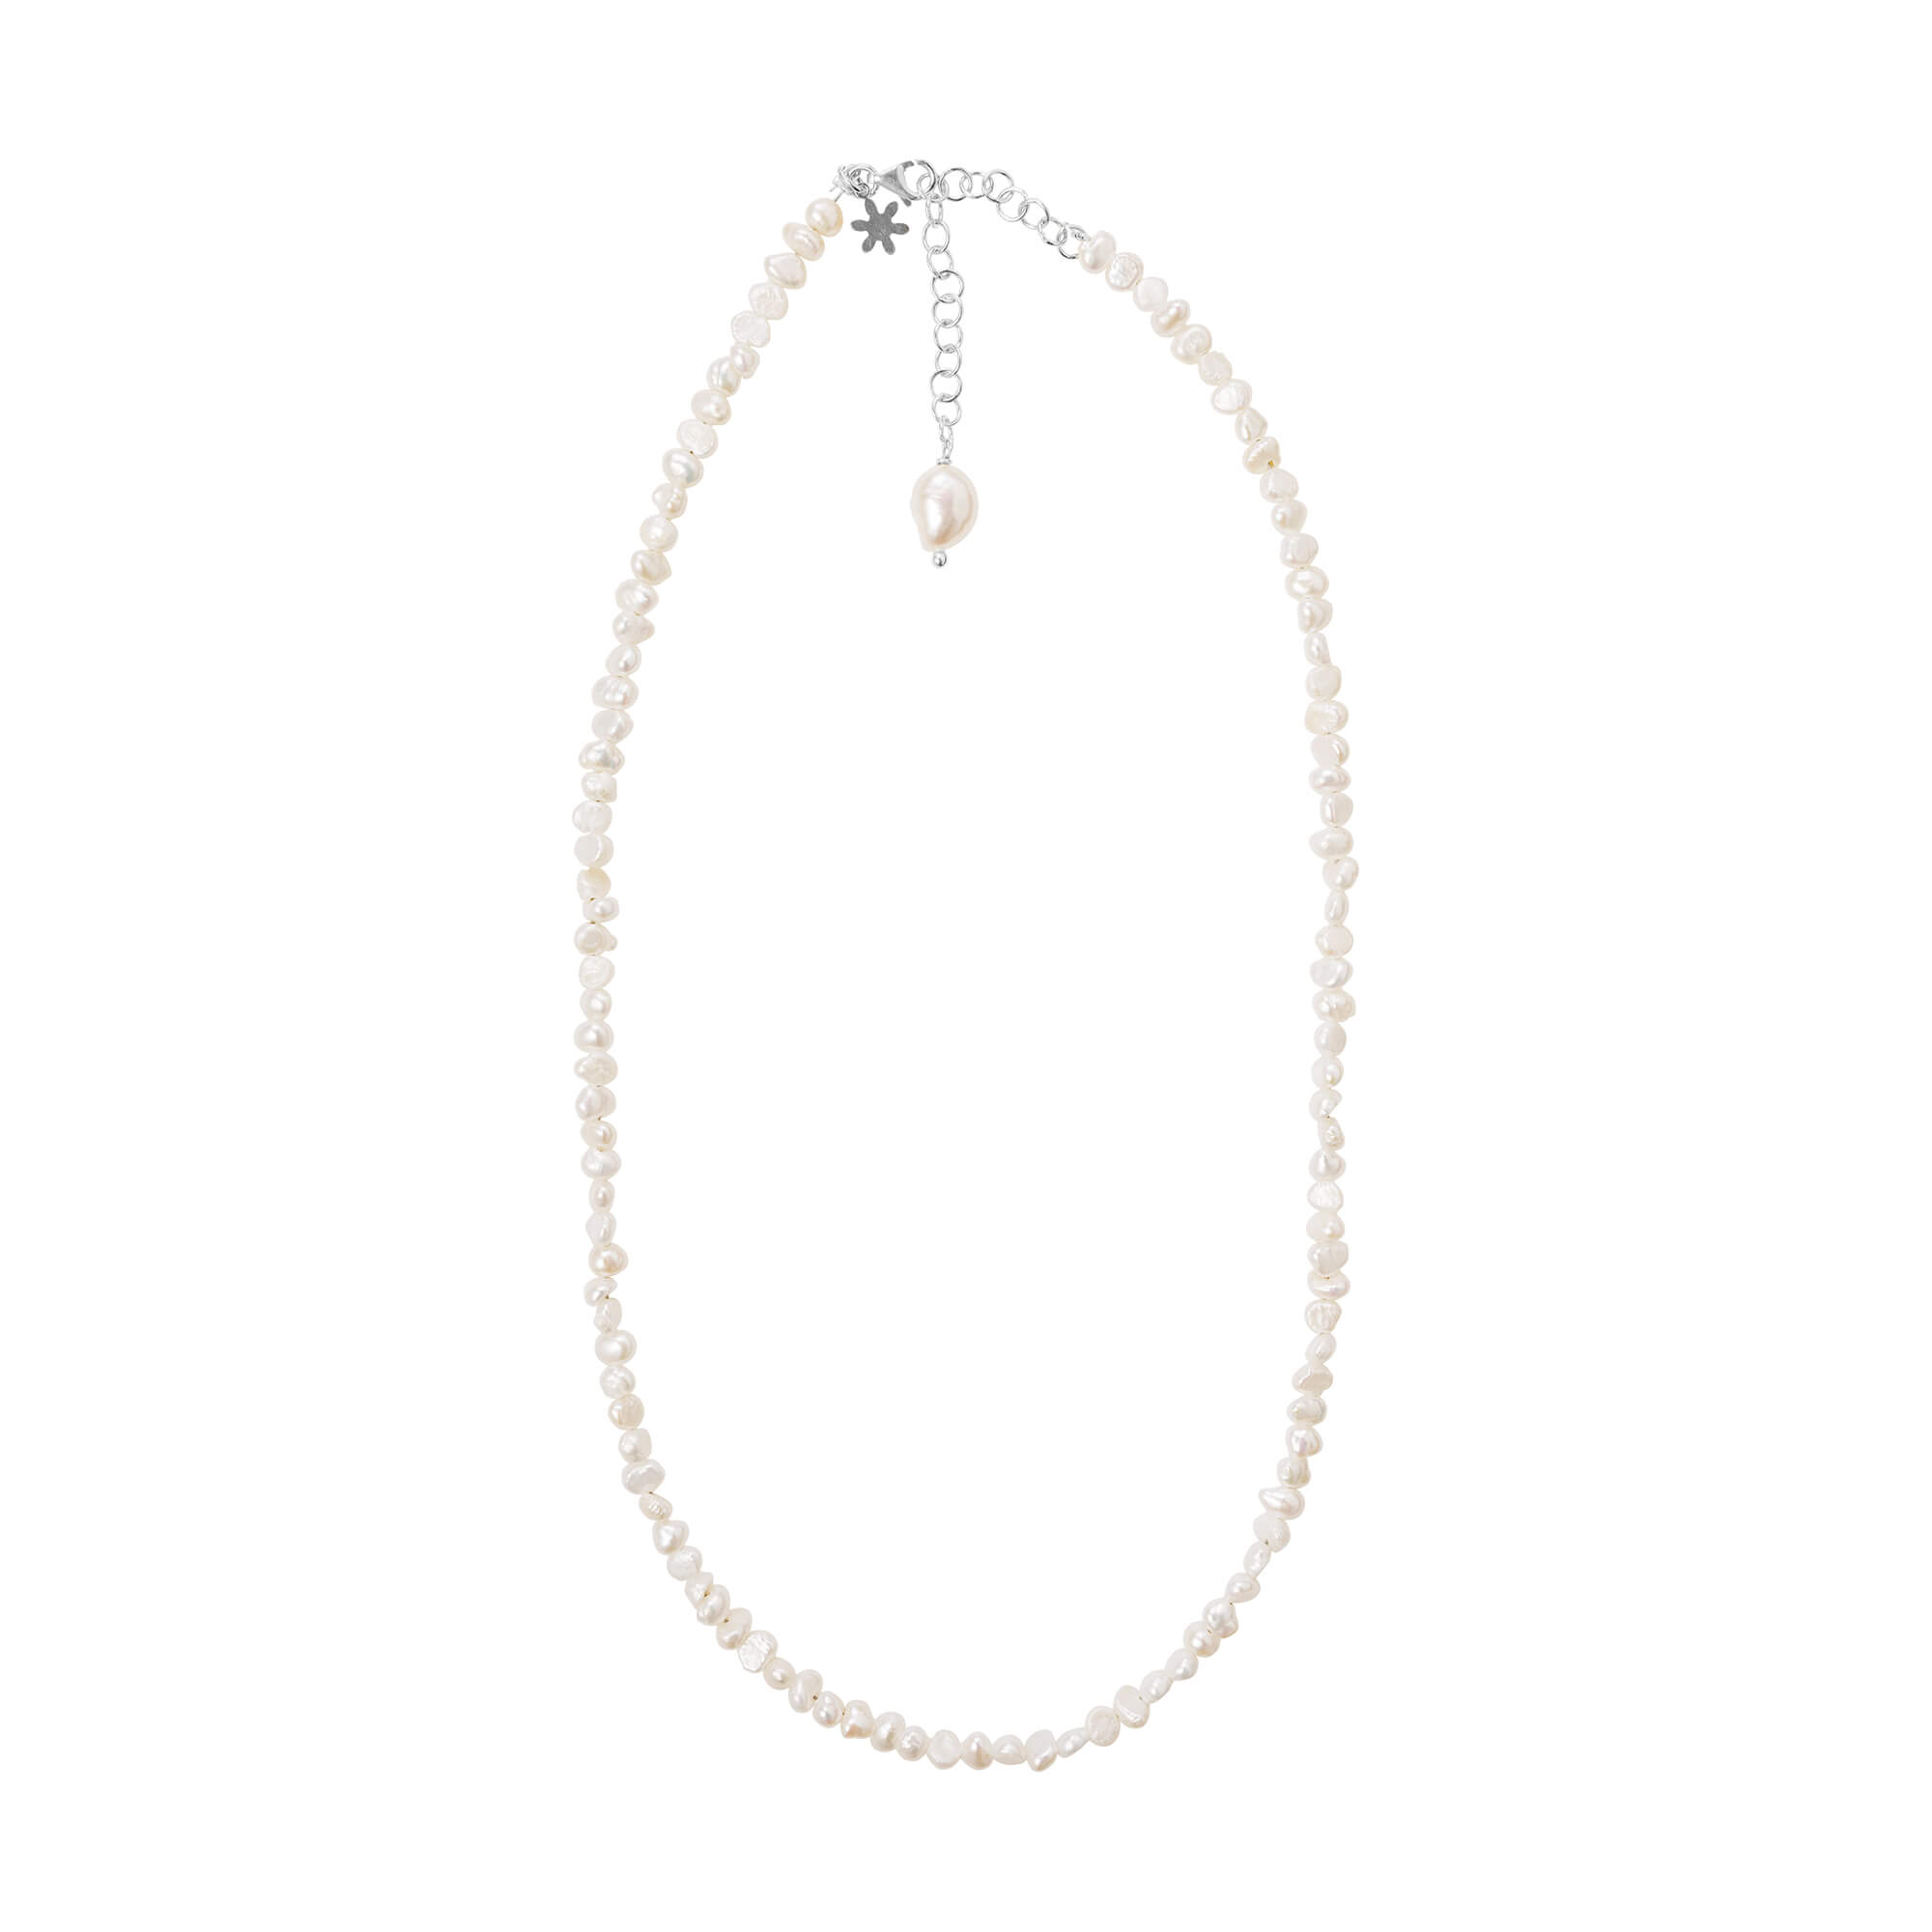 Necklace in silver with tiny pearls - Susanne Friis Bjørner | Official ...